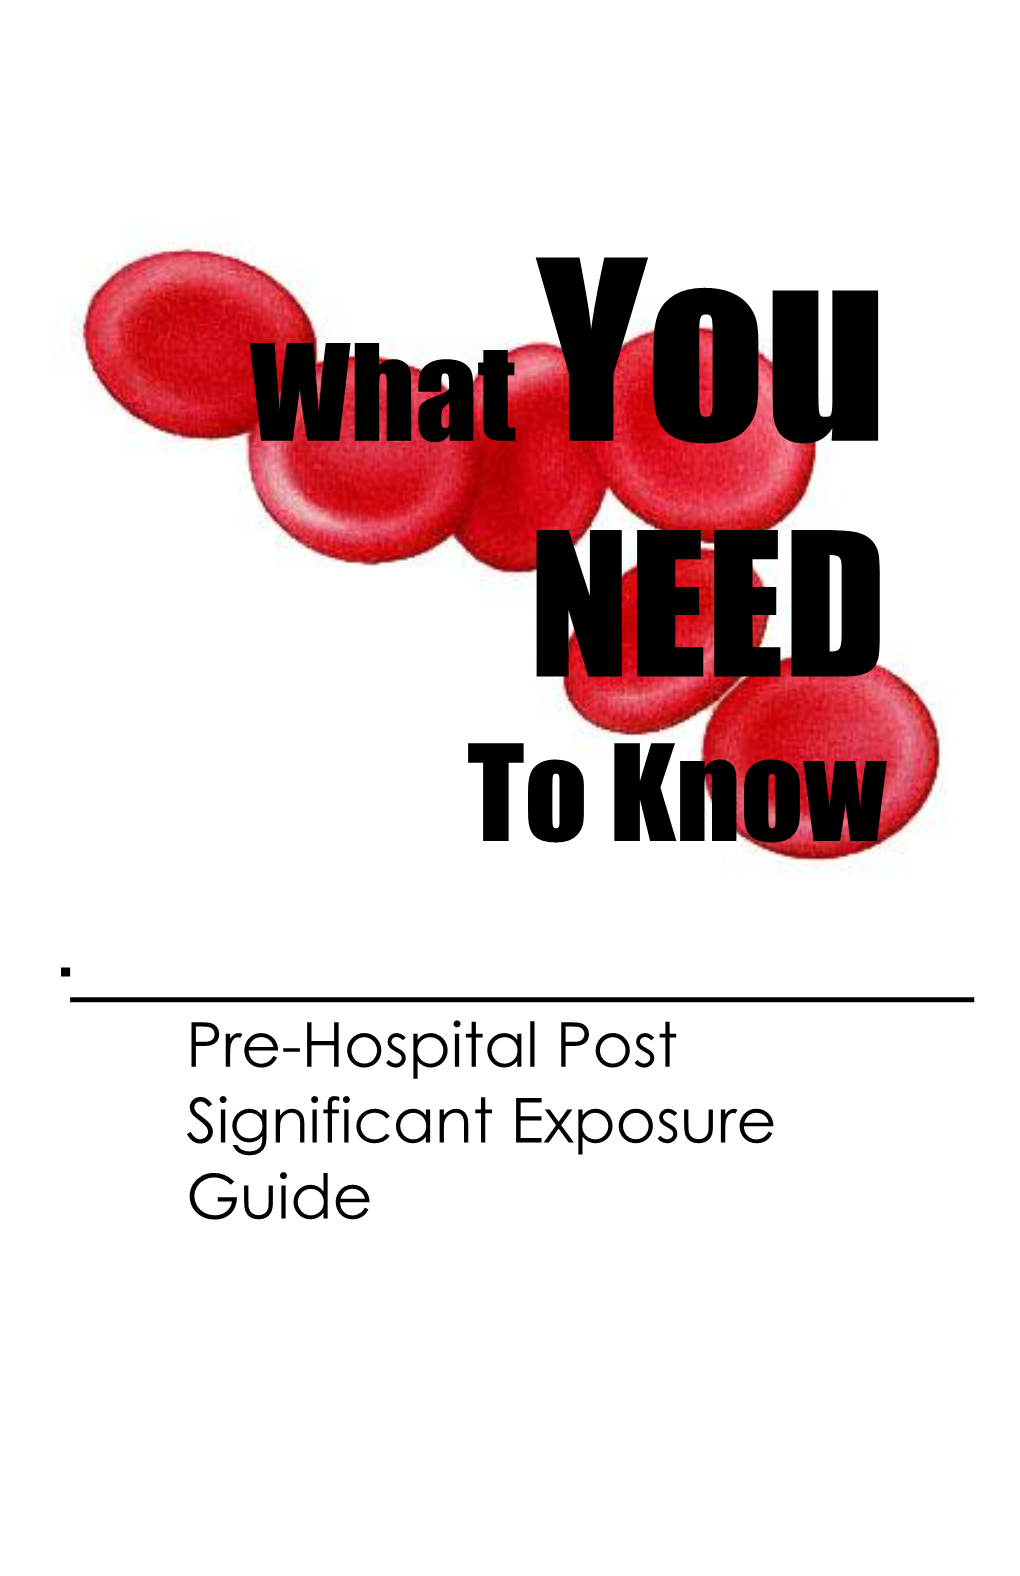 Pre-Hospital Post Significant Exposure Guide